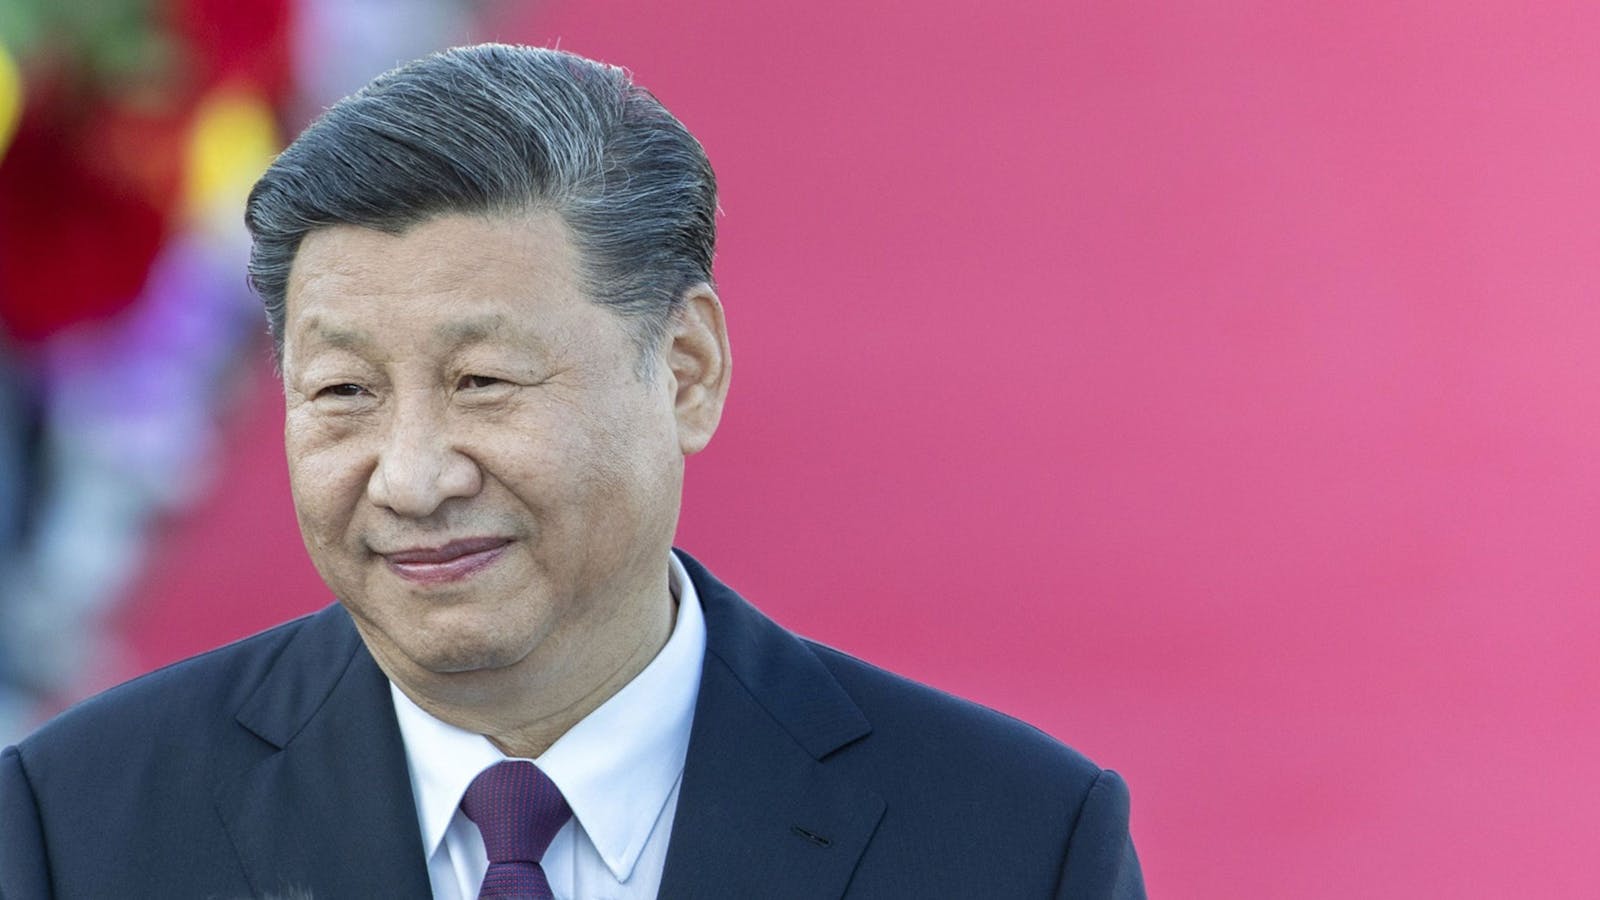 Chinese president Xi Jinping. Photo by Bloomberg